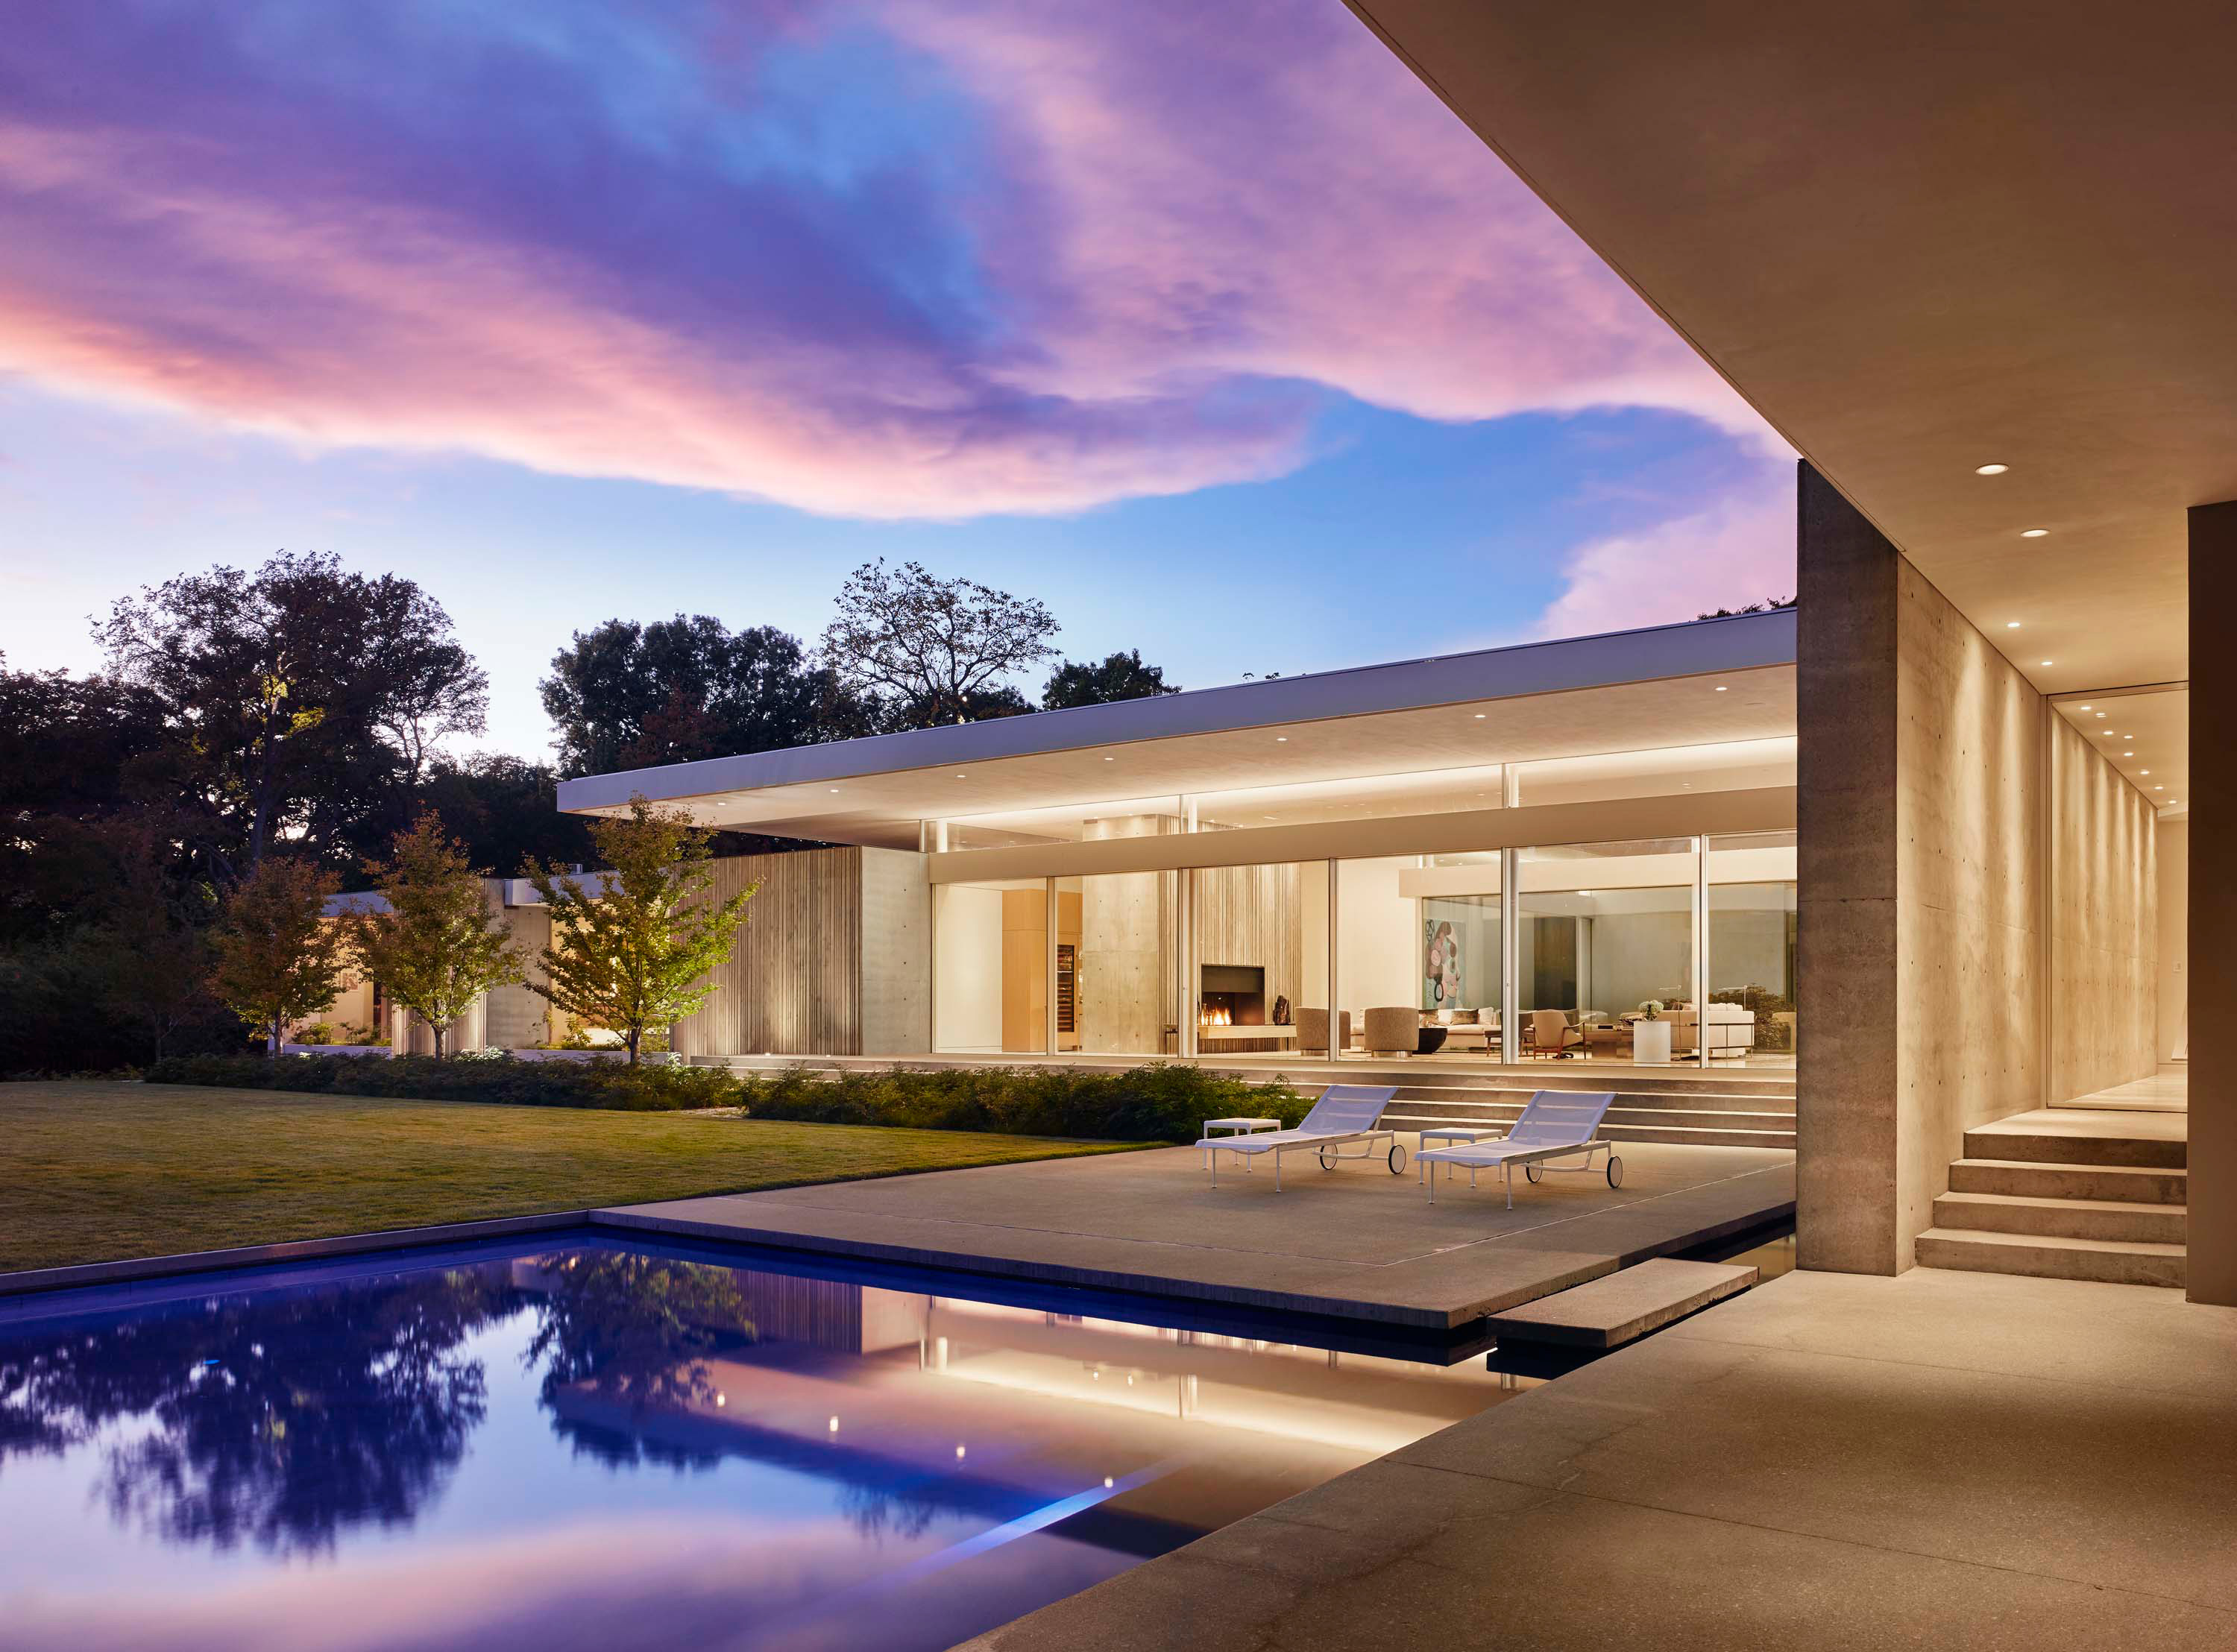 Exterior photo of the Preston Hollow Residence by Specht Novak Architects. Shot at dusk by Manolo Langis, featuring an entry hallway, the pool, yard, lounging areas, and glowing home.